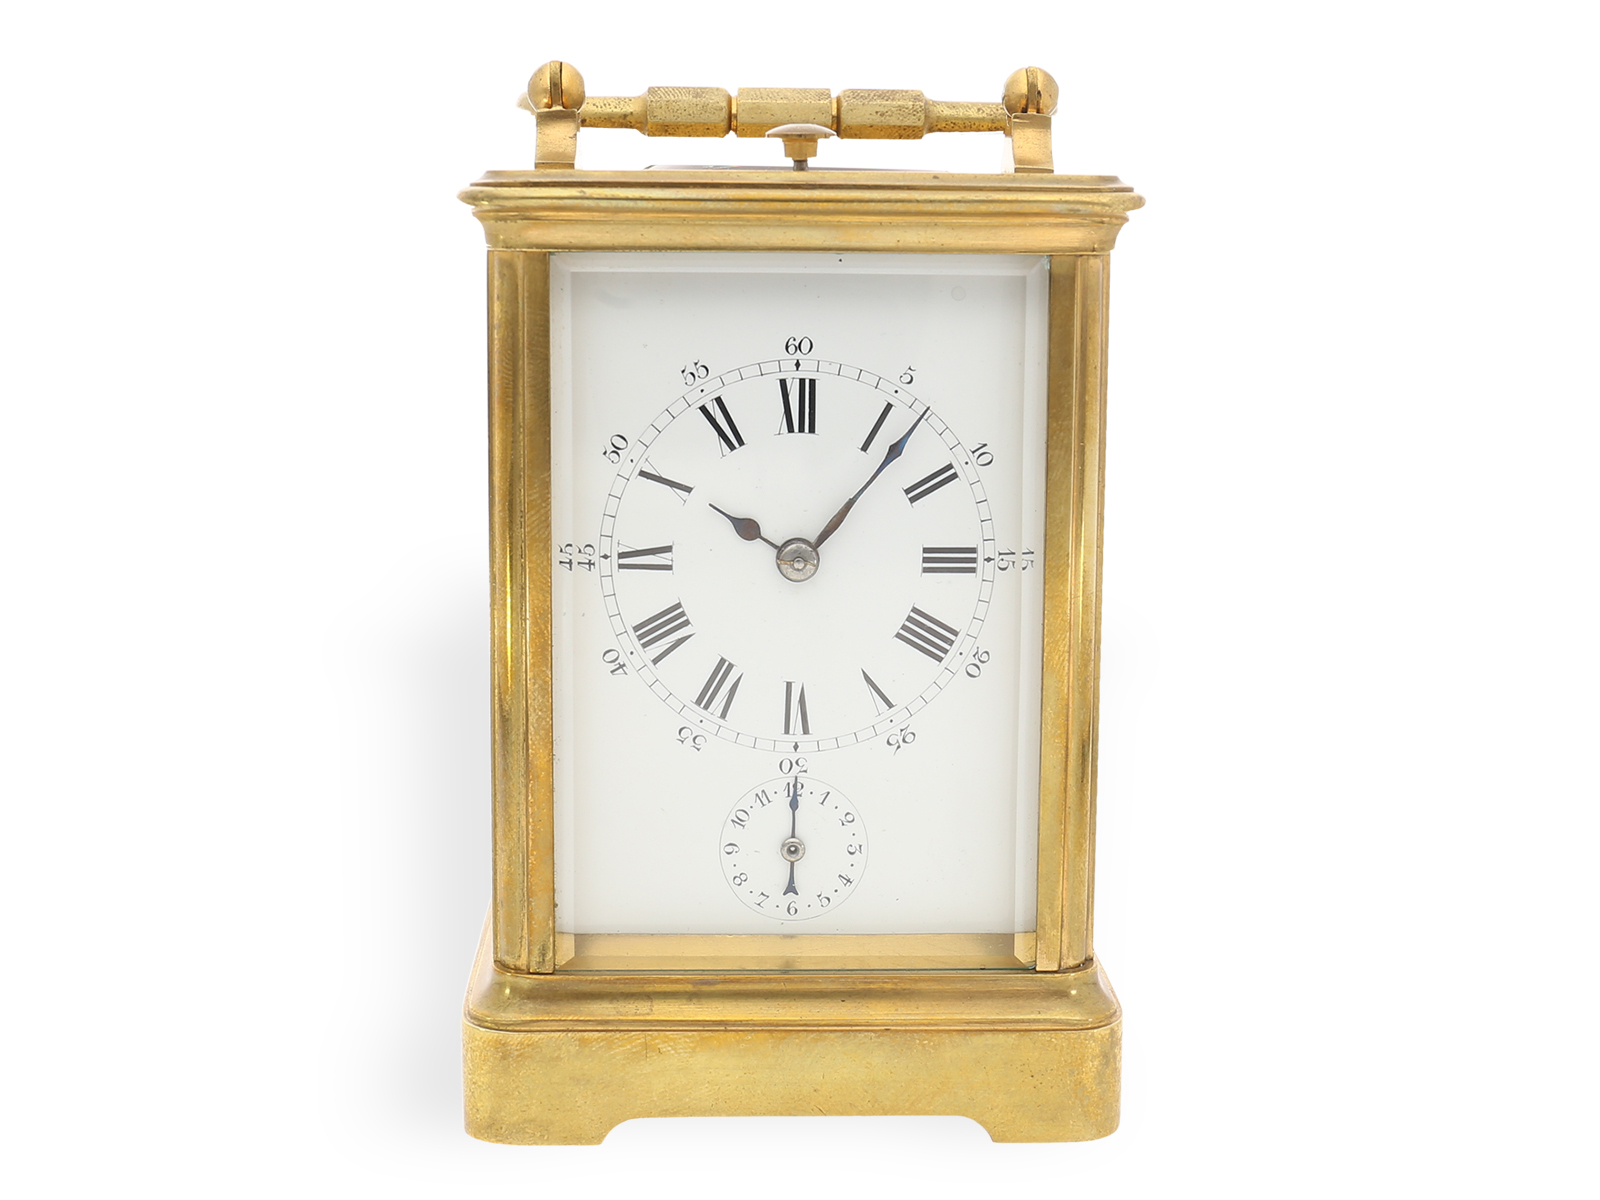 Exquisite, complicated travel clock with grande sonnerie, repeater and alarm, Leroy Paris, ca. 1900